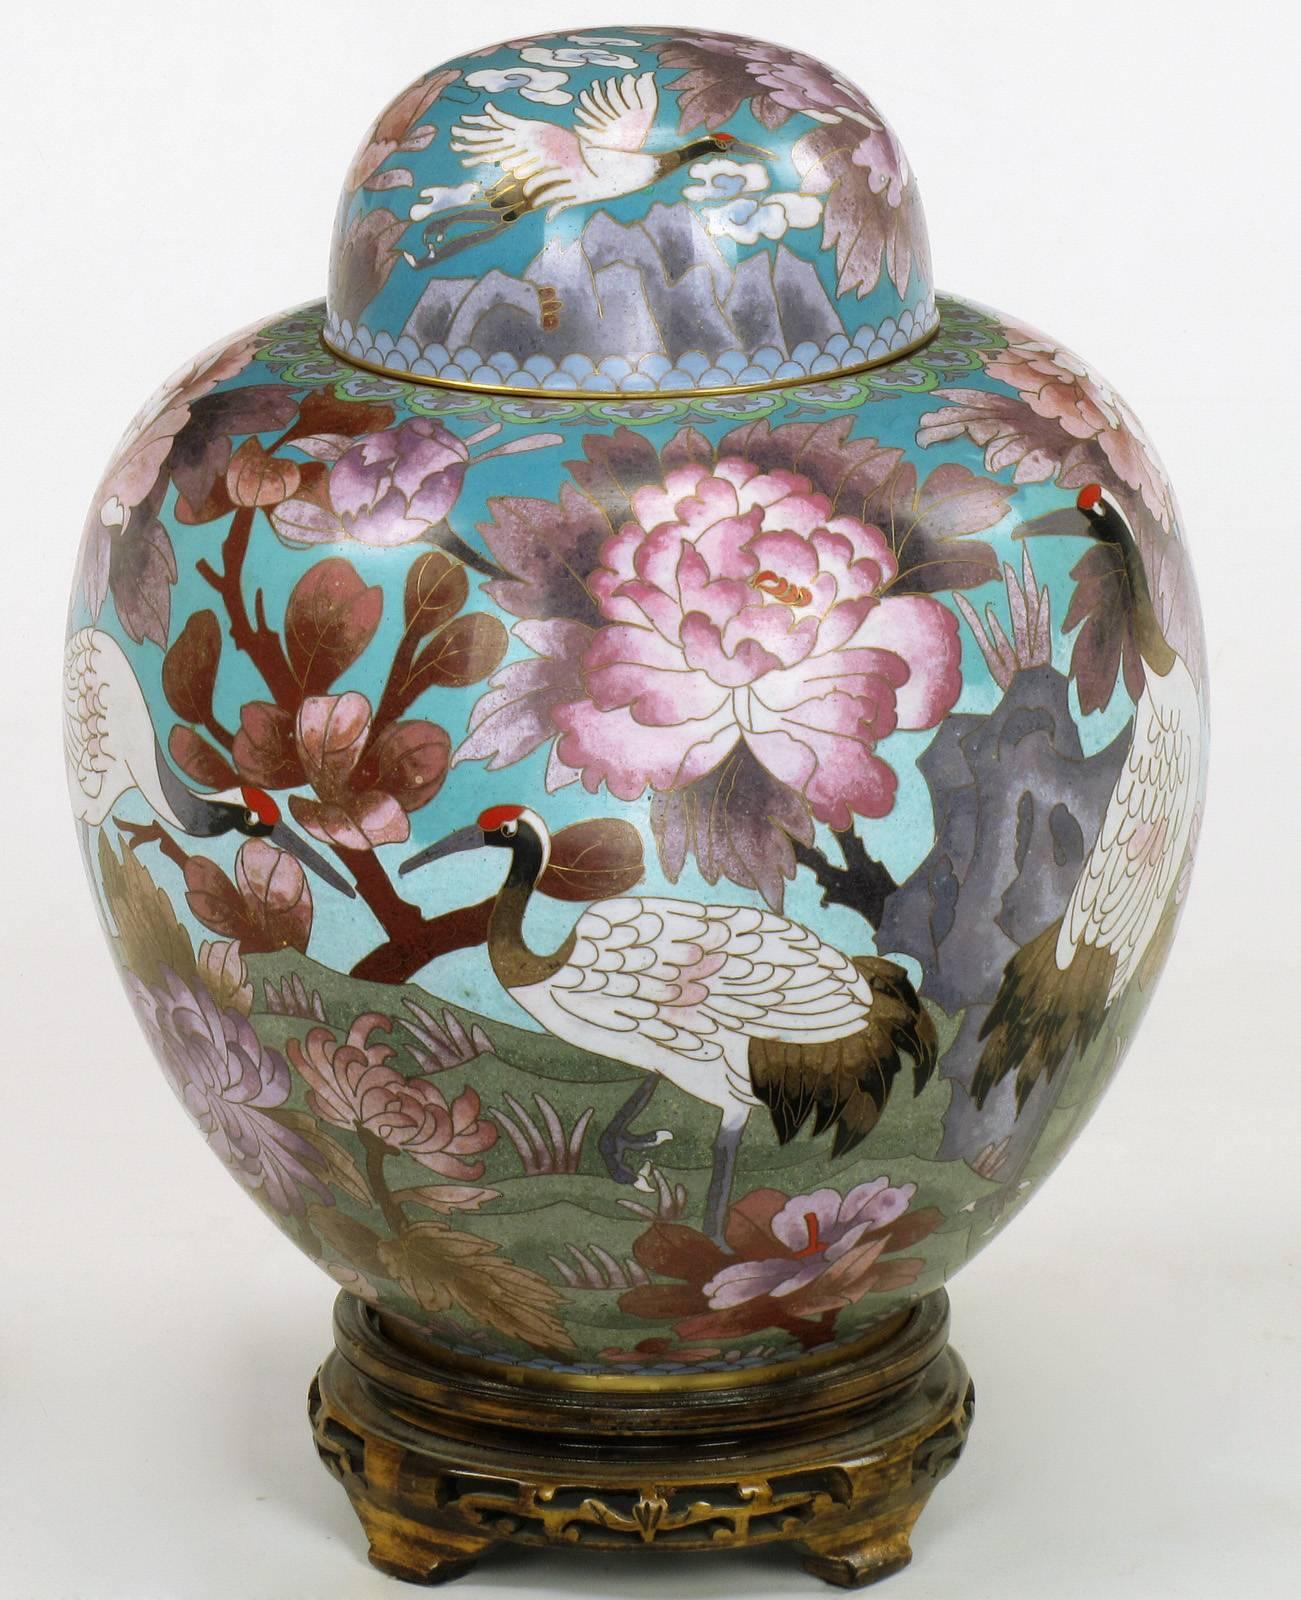 Pair of Chinese cloisonné capped urns with carved and pierced fruitwood bases. Red-crowned cranes with assorted flora on a sky blue background with volcanoes and muted green mountains. Most probably made by Jingfa, award winning manufacturer of fine